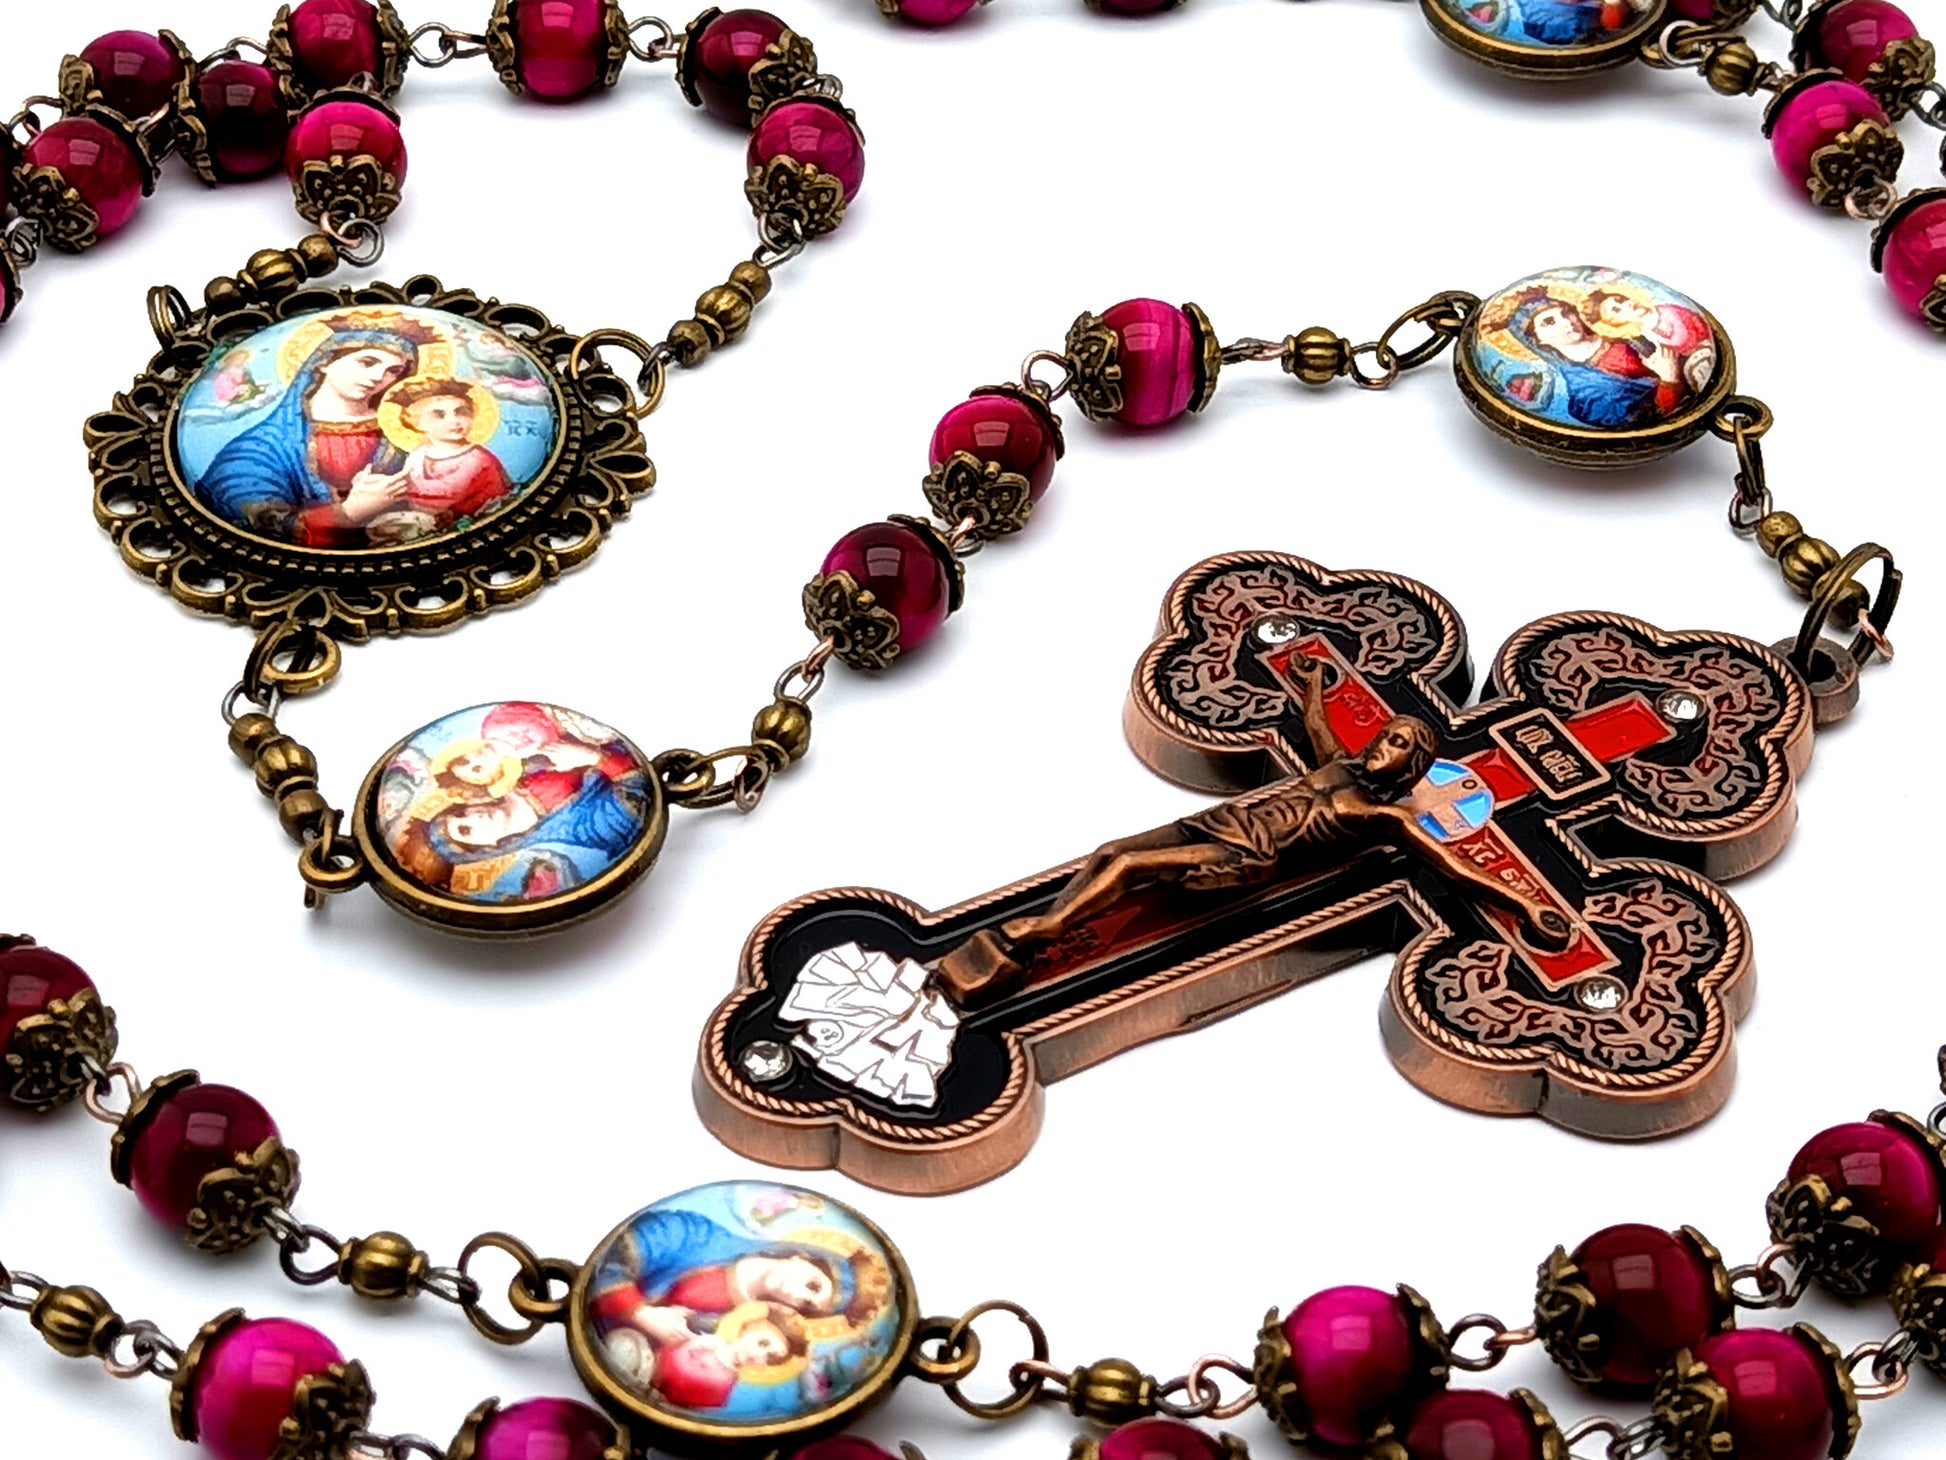 Vintage style Our Lady of Perpetual Help unique rosary beads with tigers eye gemstone beads and large ornate enamel crucifix.